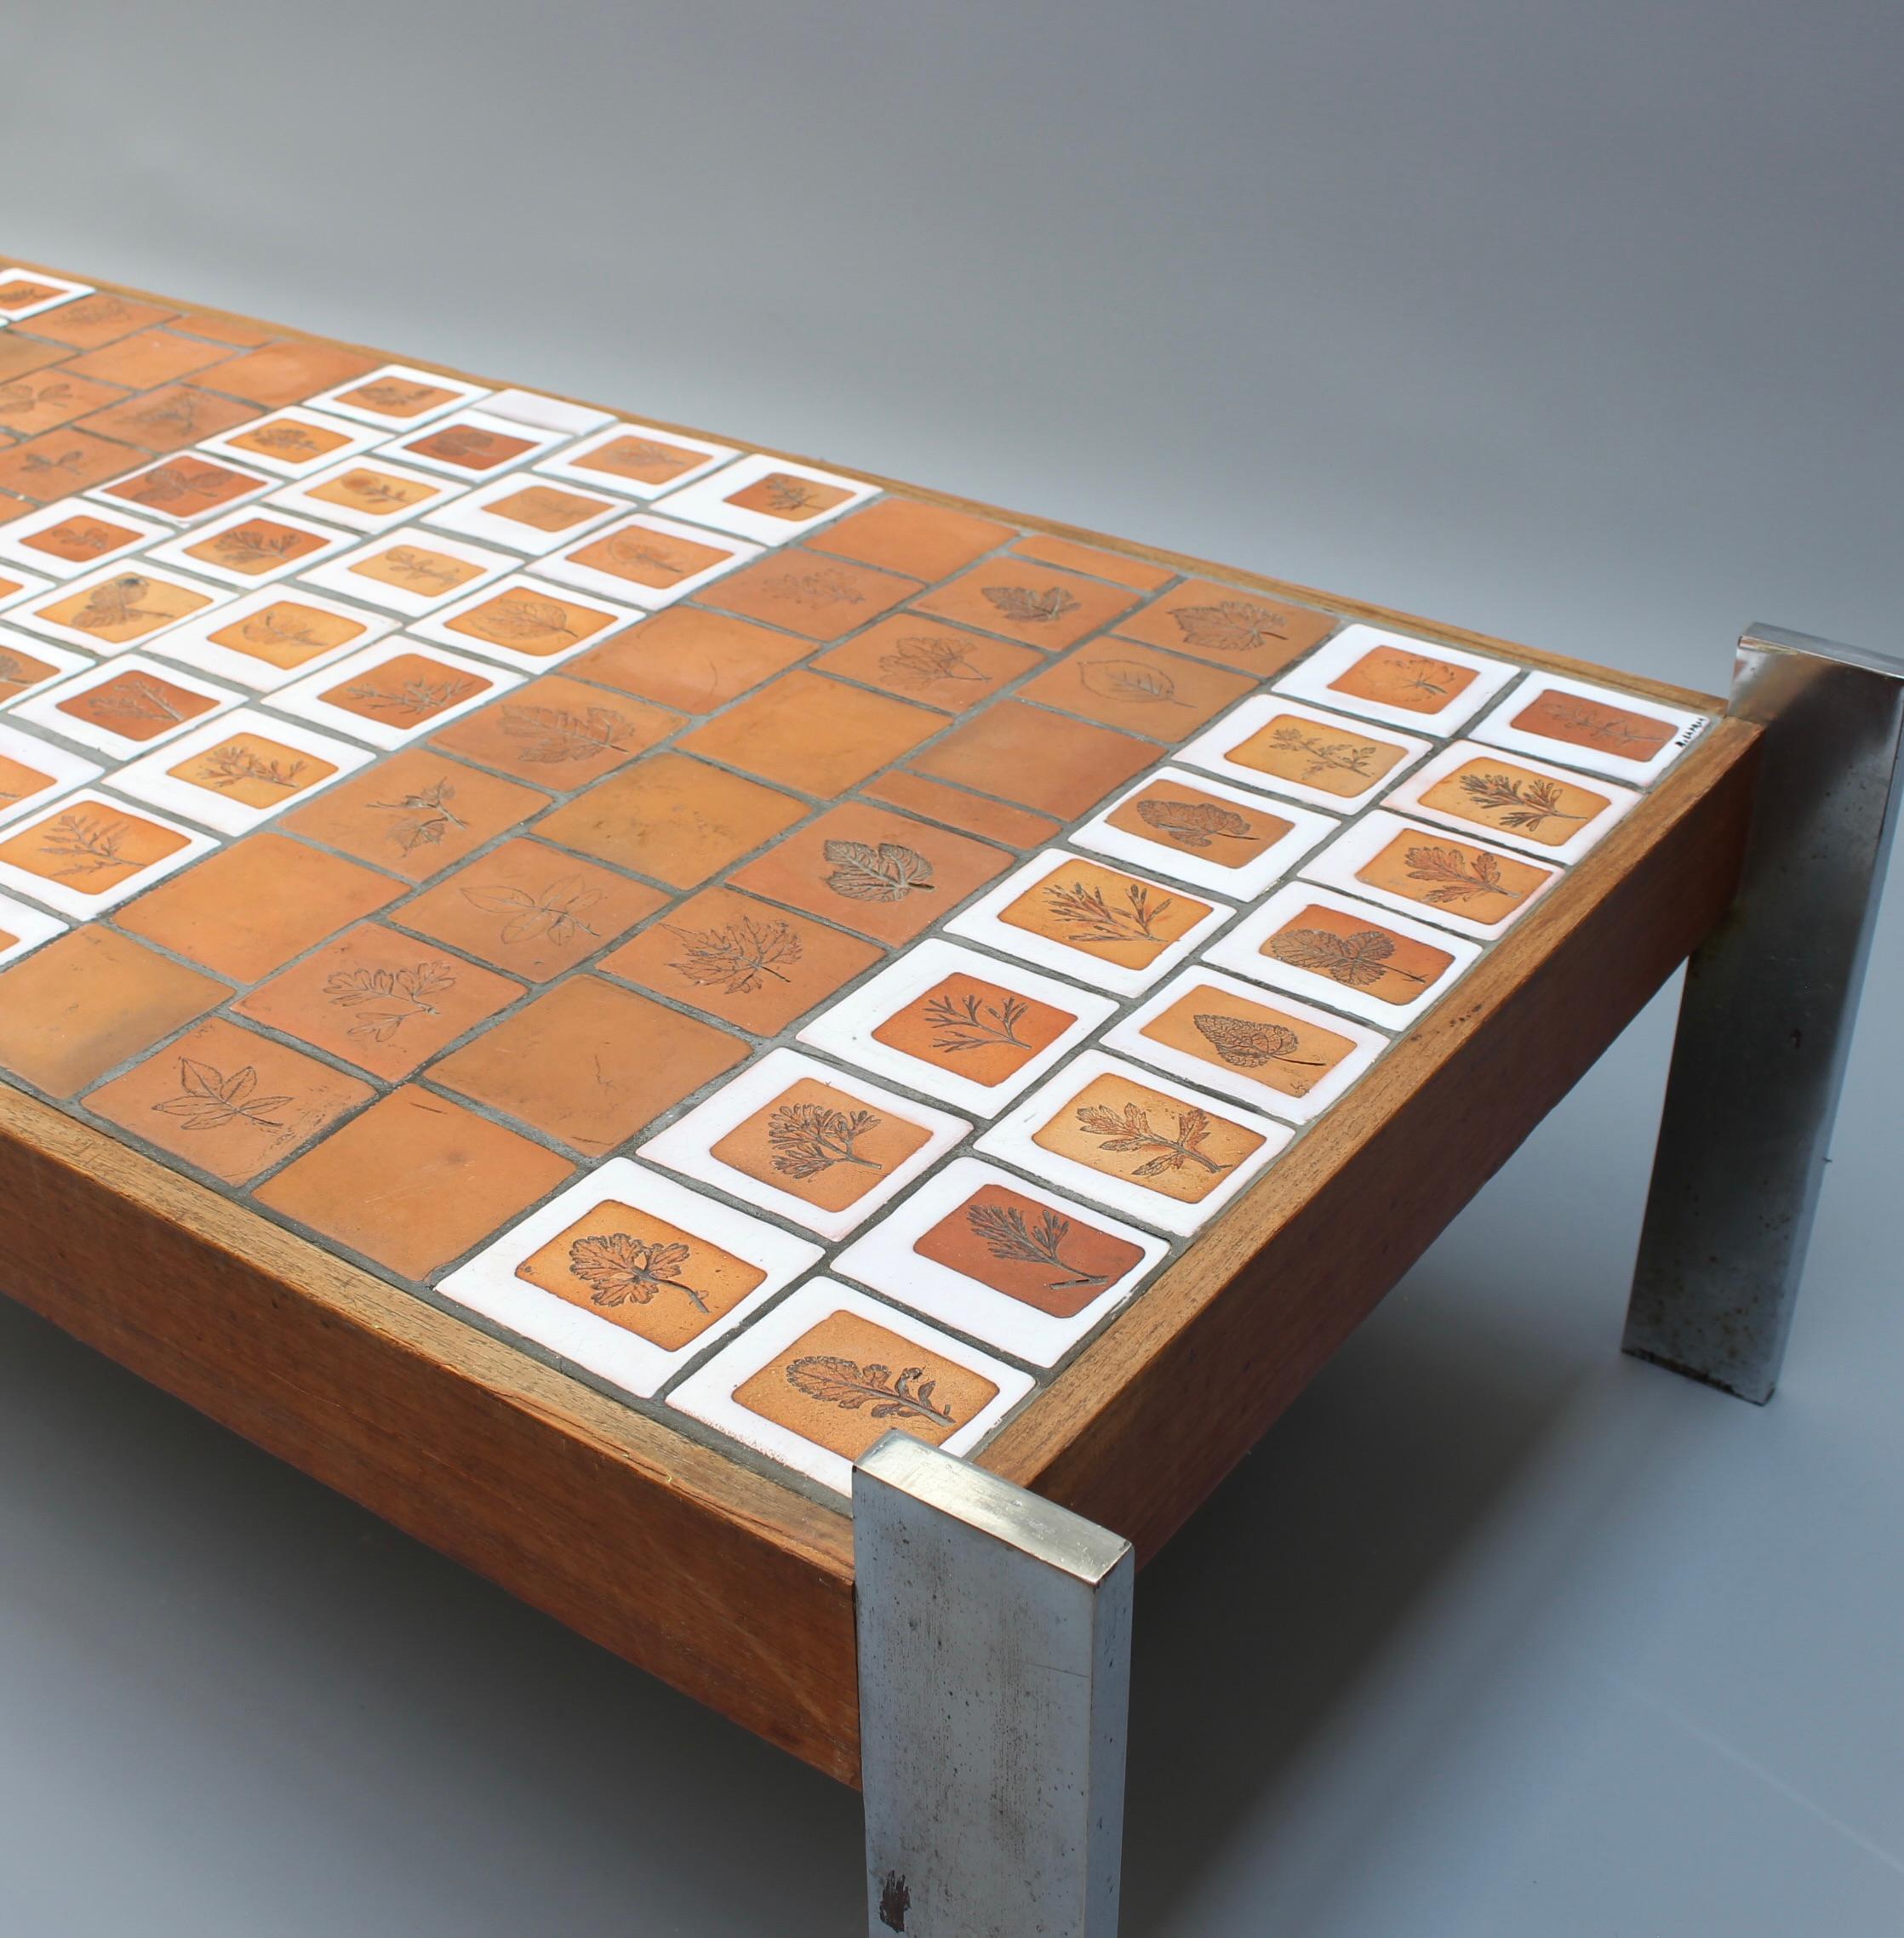 Vintage French Coffee Table with Leaf Motif Tiles by Roger Capron (circa 1970s) For Sale 15